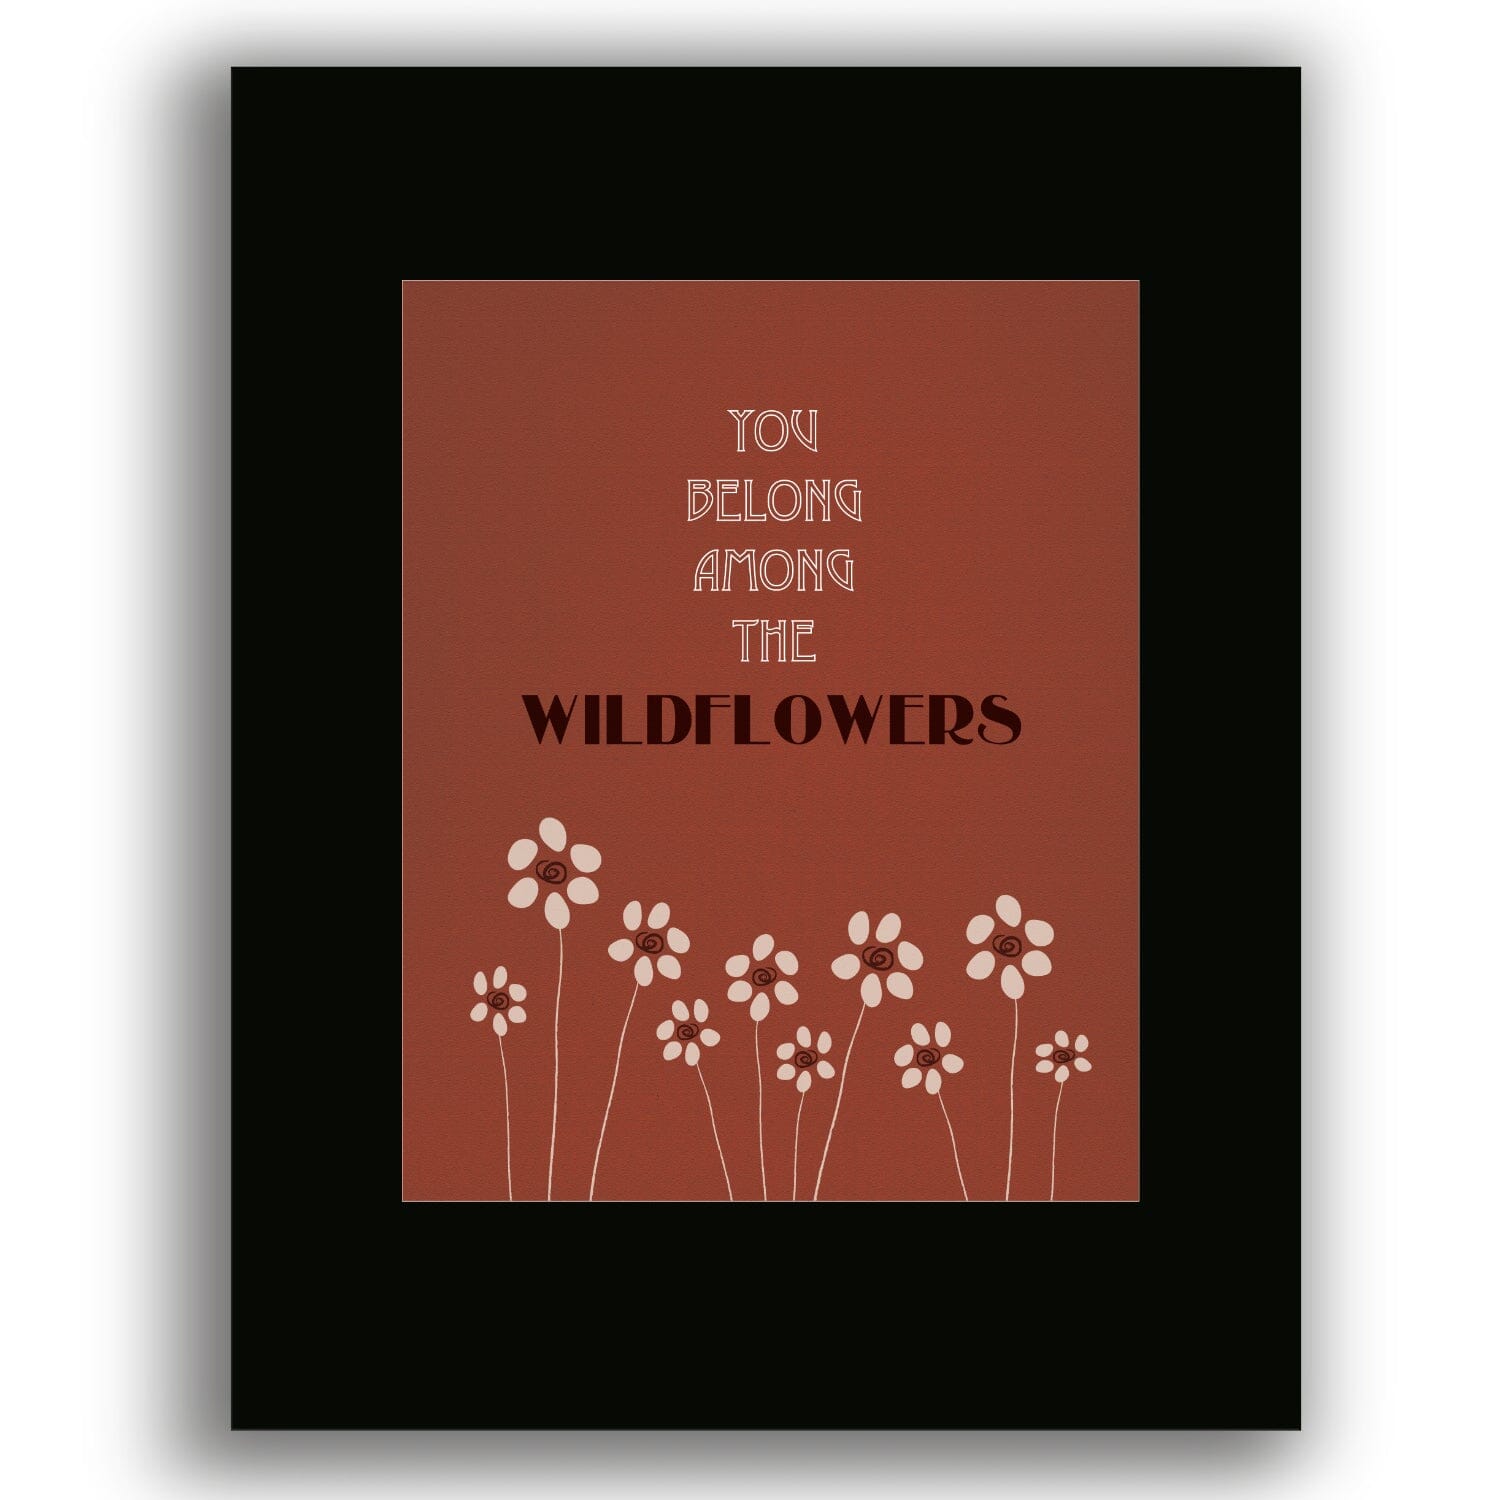 Wildflowers by Tom Petty - Music Poster Song Lyric Art Print Song Lyrics Art Song Lyrics Art 8x10 Black Matted Print 